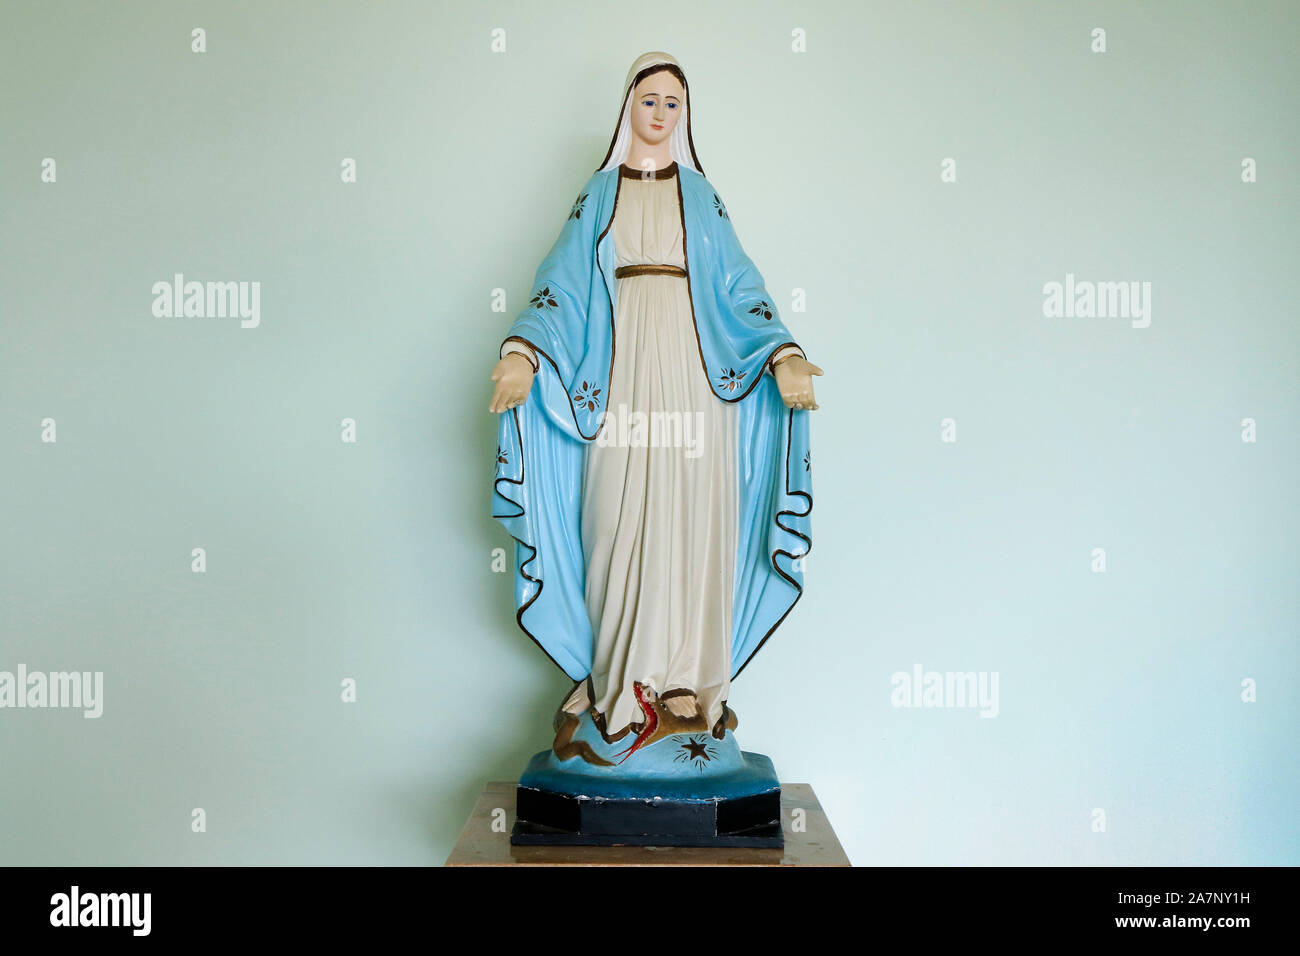 Statue of the image of Our Lady of Grace, mother of God in the Catholic religion Stock Photo